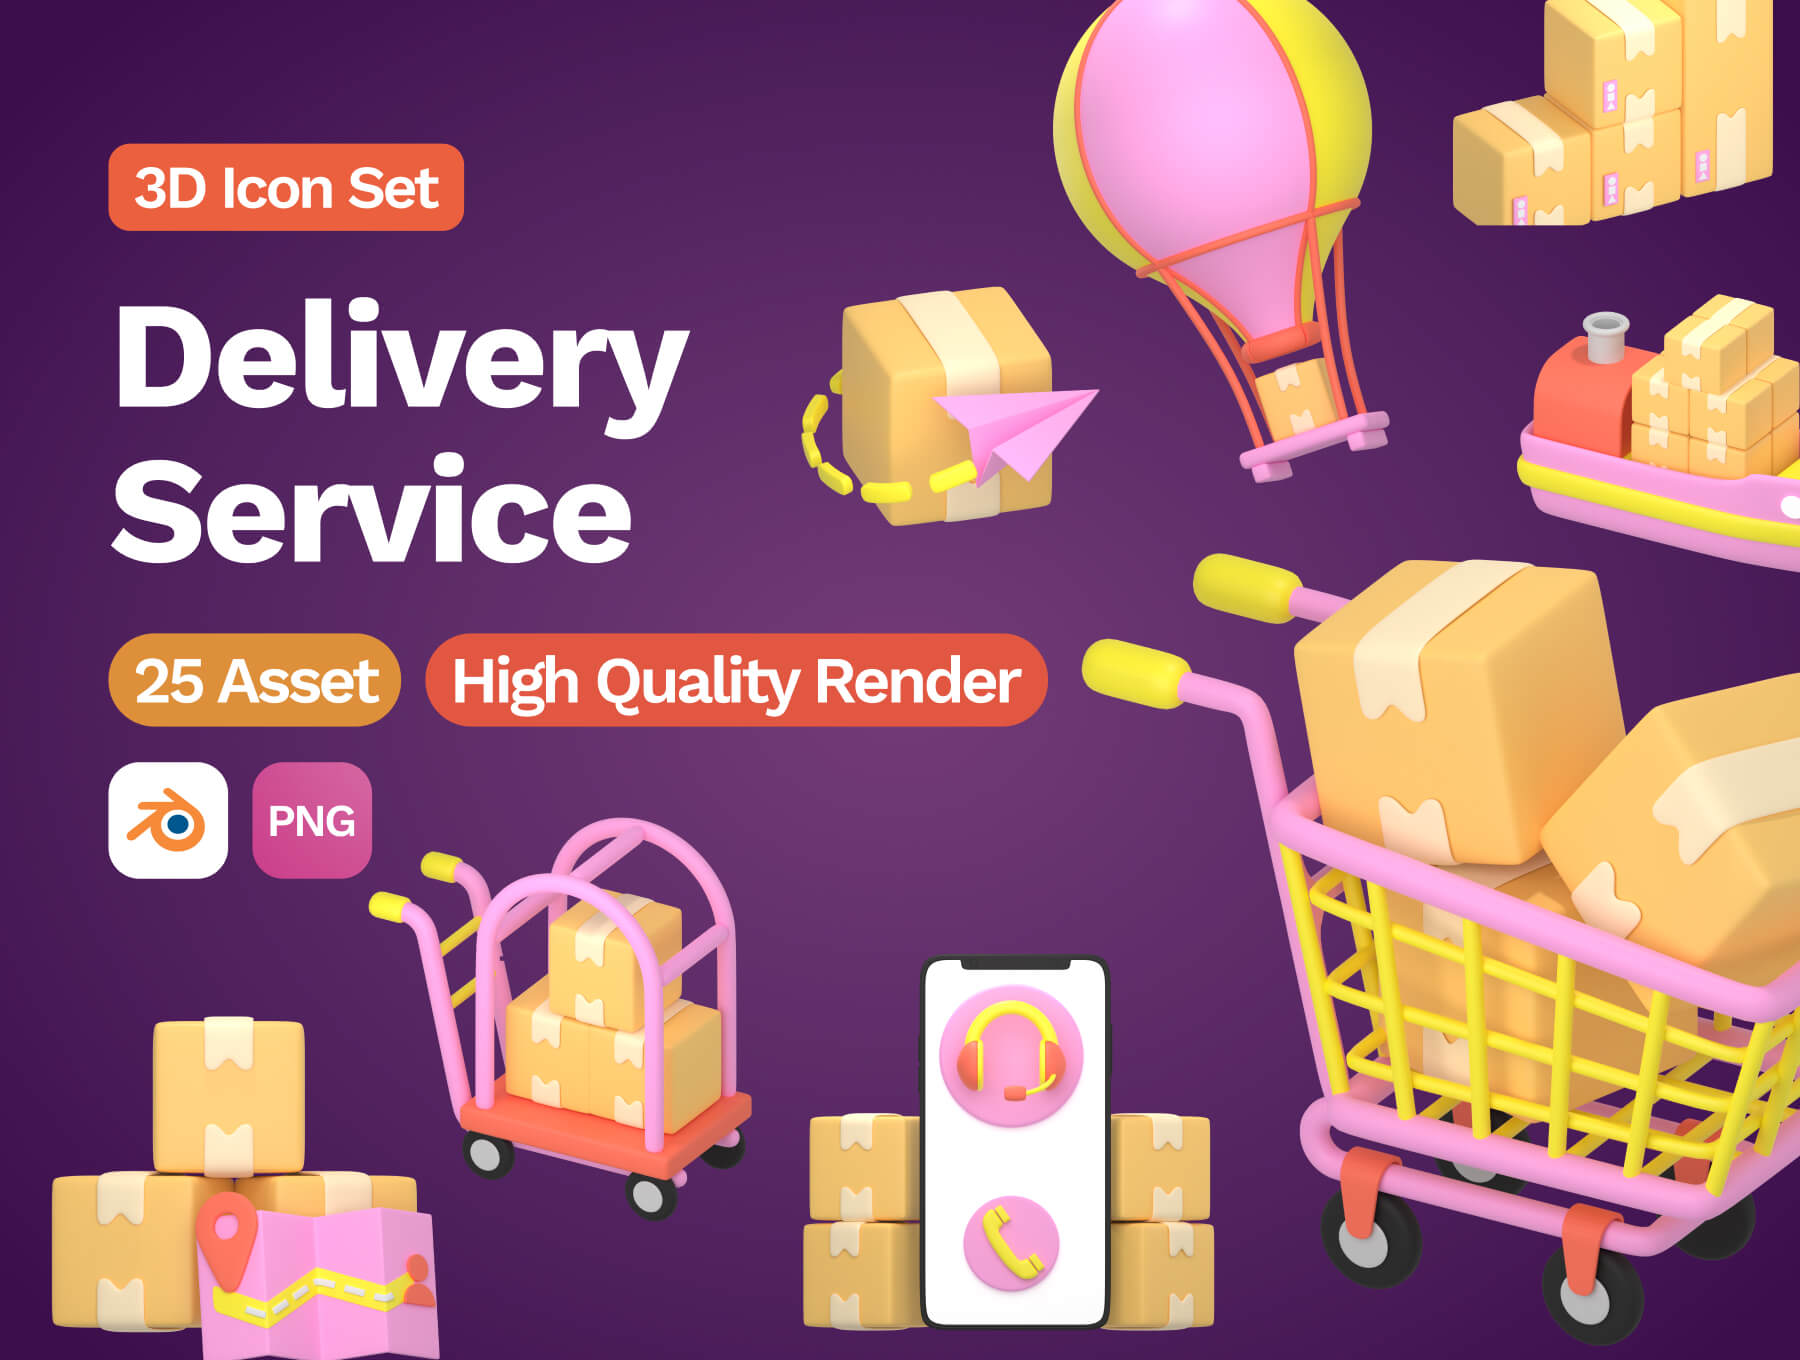 3D交付服务购物类图标素材模板素材3d Delivery Services Icon插图